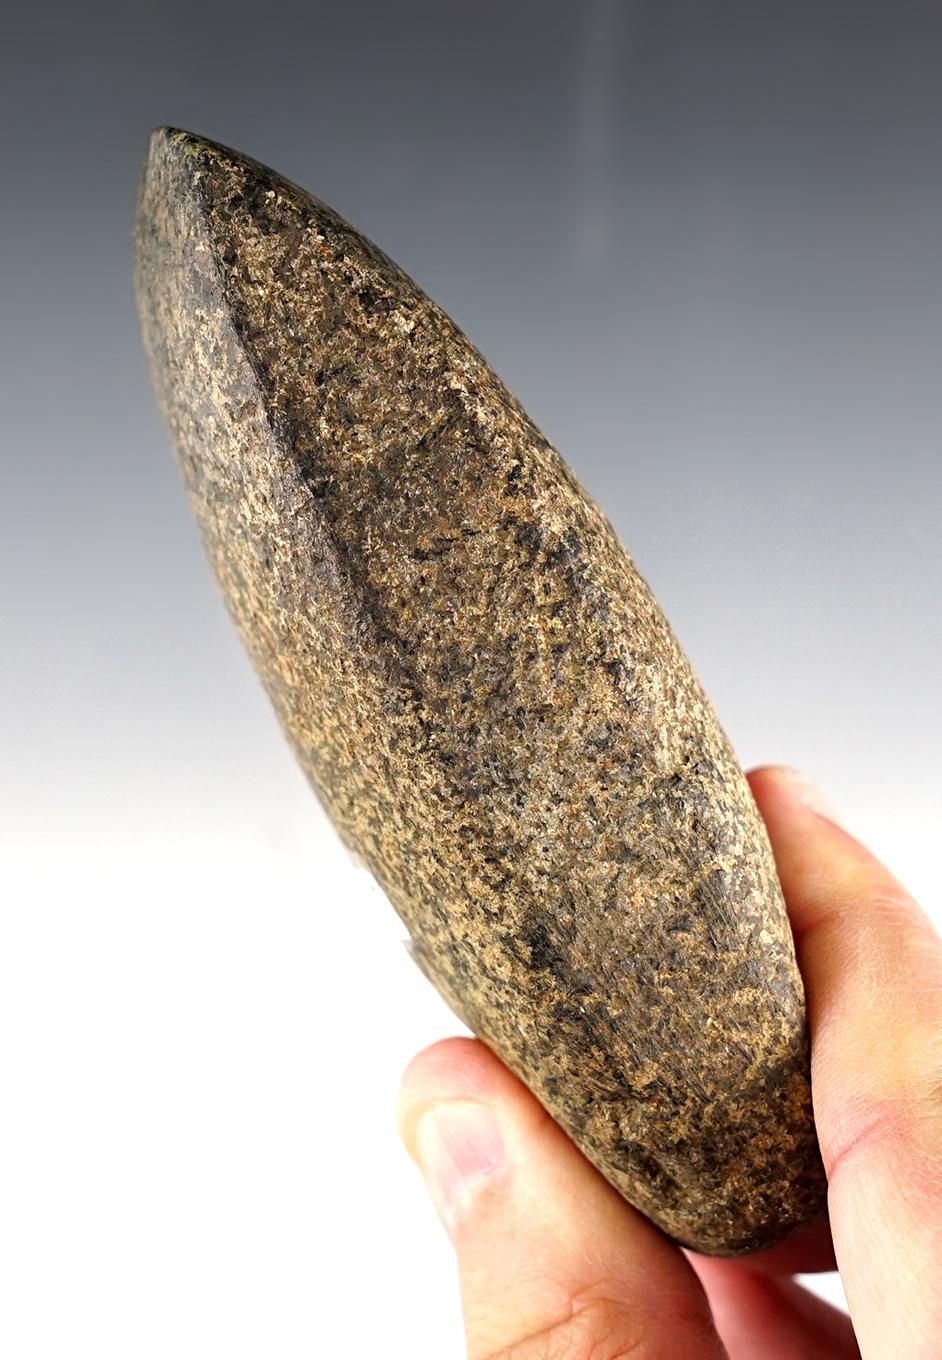 4 1/2" Celt made from Hardstone with a nicely polished bit. Found in Jefferson Co., Ohio.